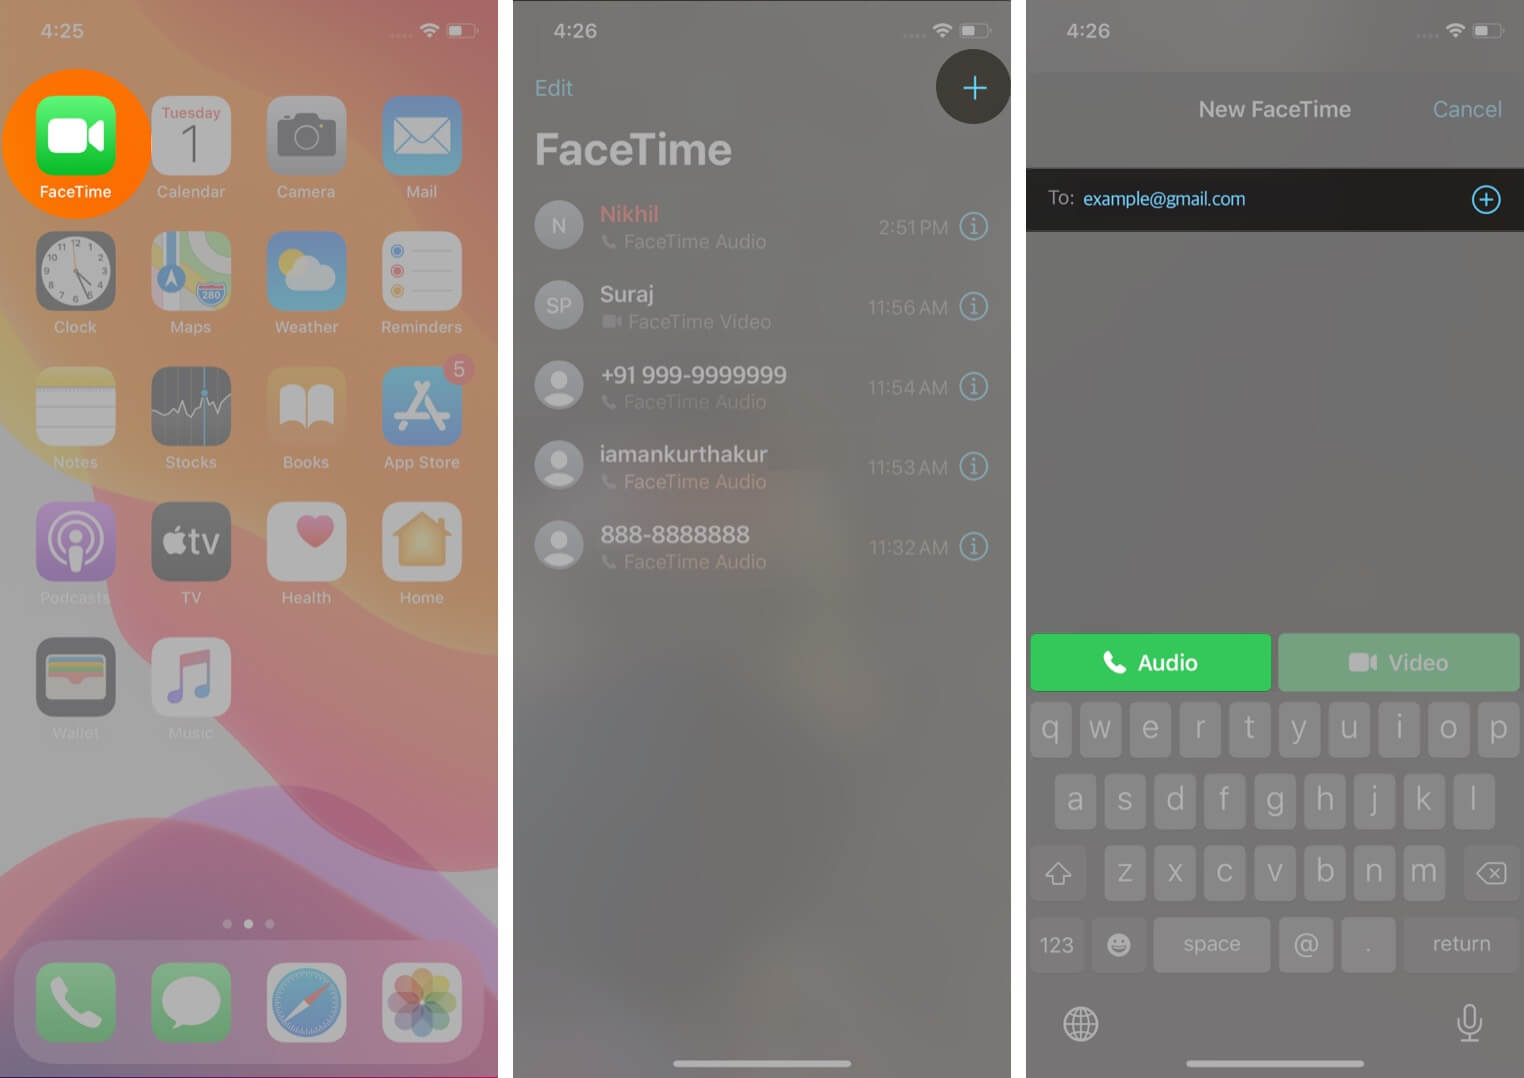 open facetime tap on plus and add contact to make facetime audio call on iphone